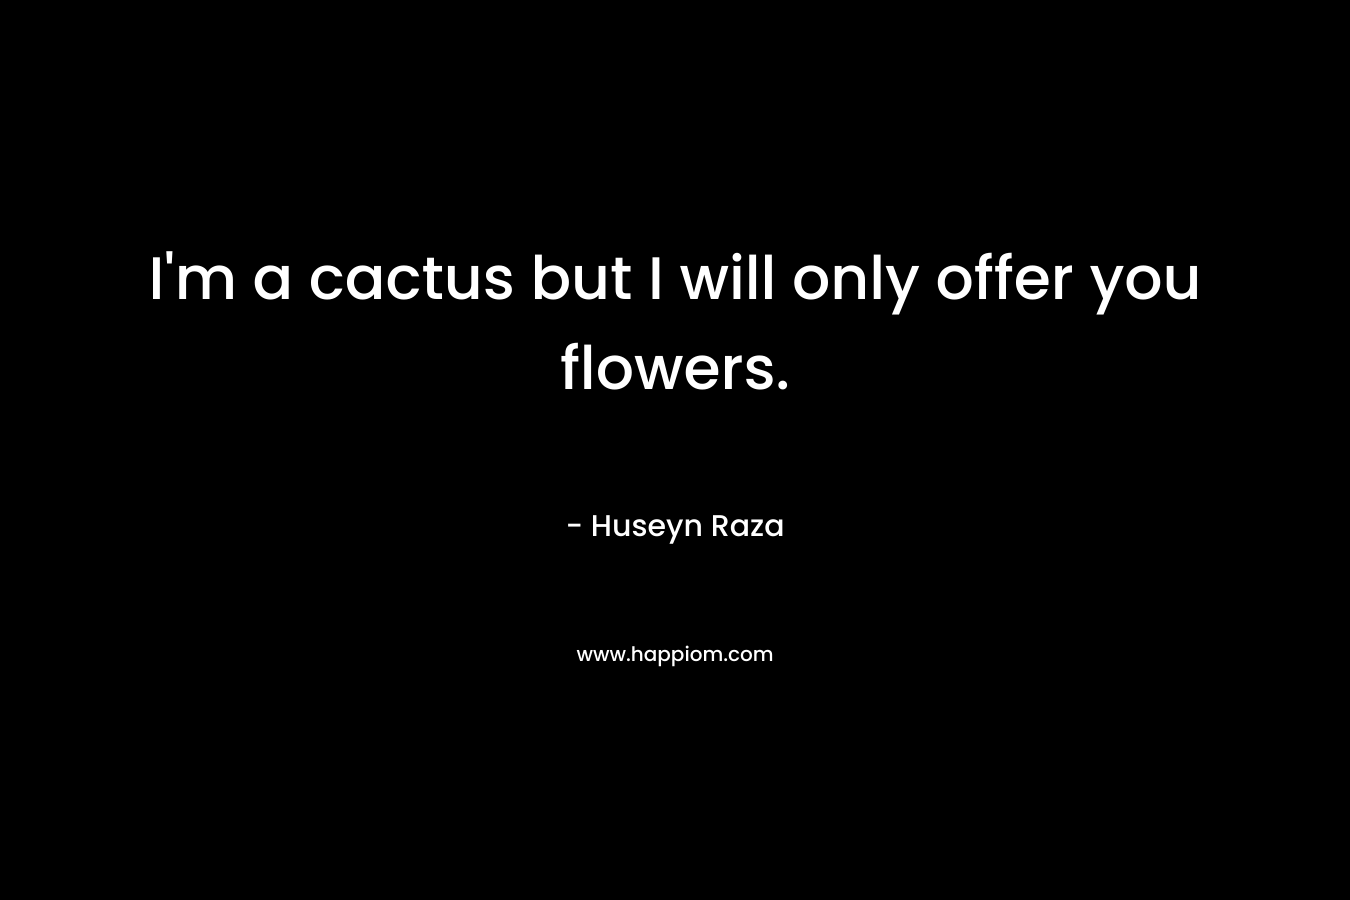 I’m a cactus but I will only offer you flowers. – Huseyn Raza